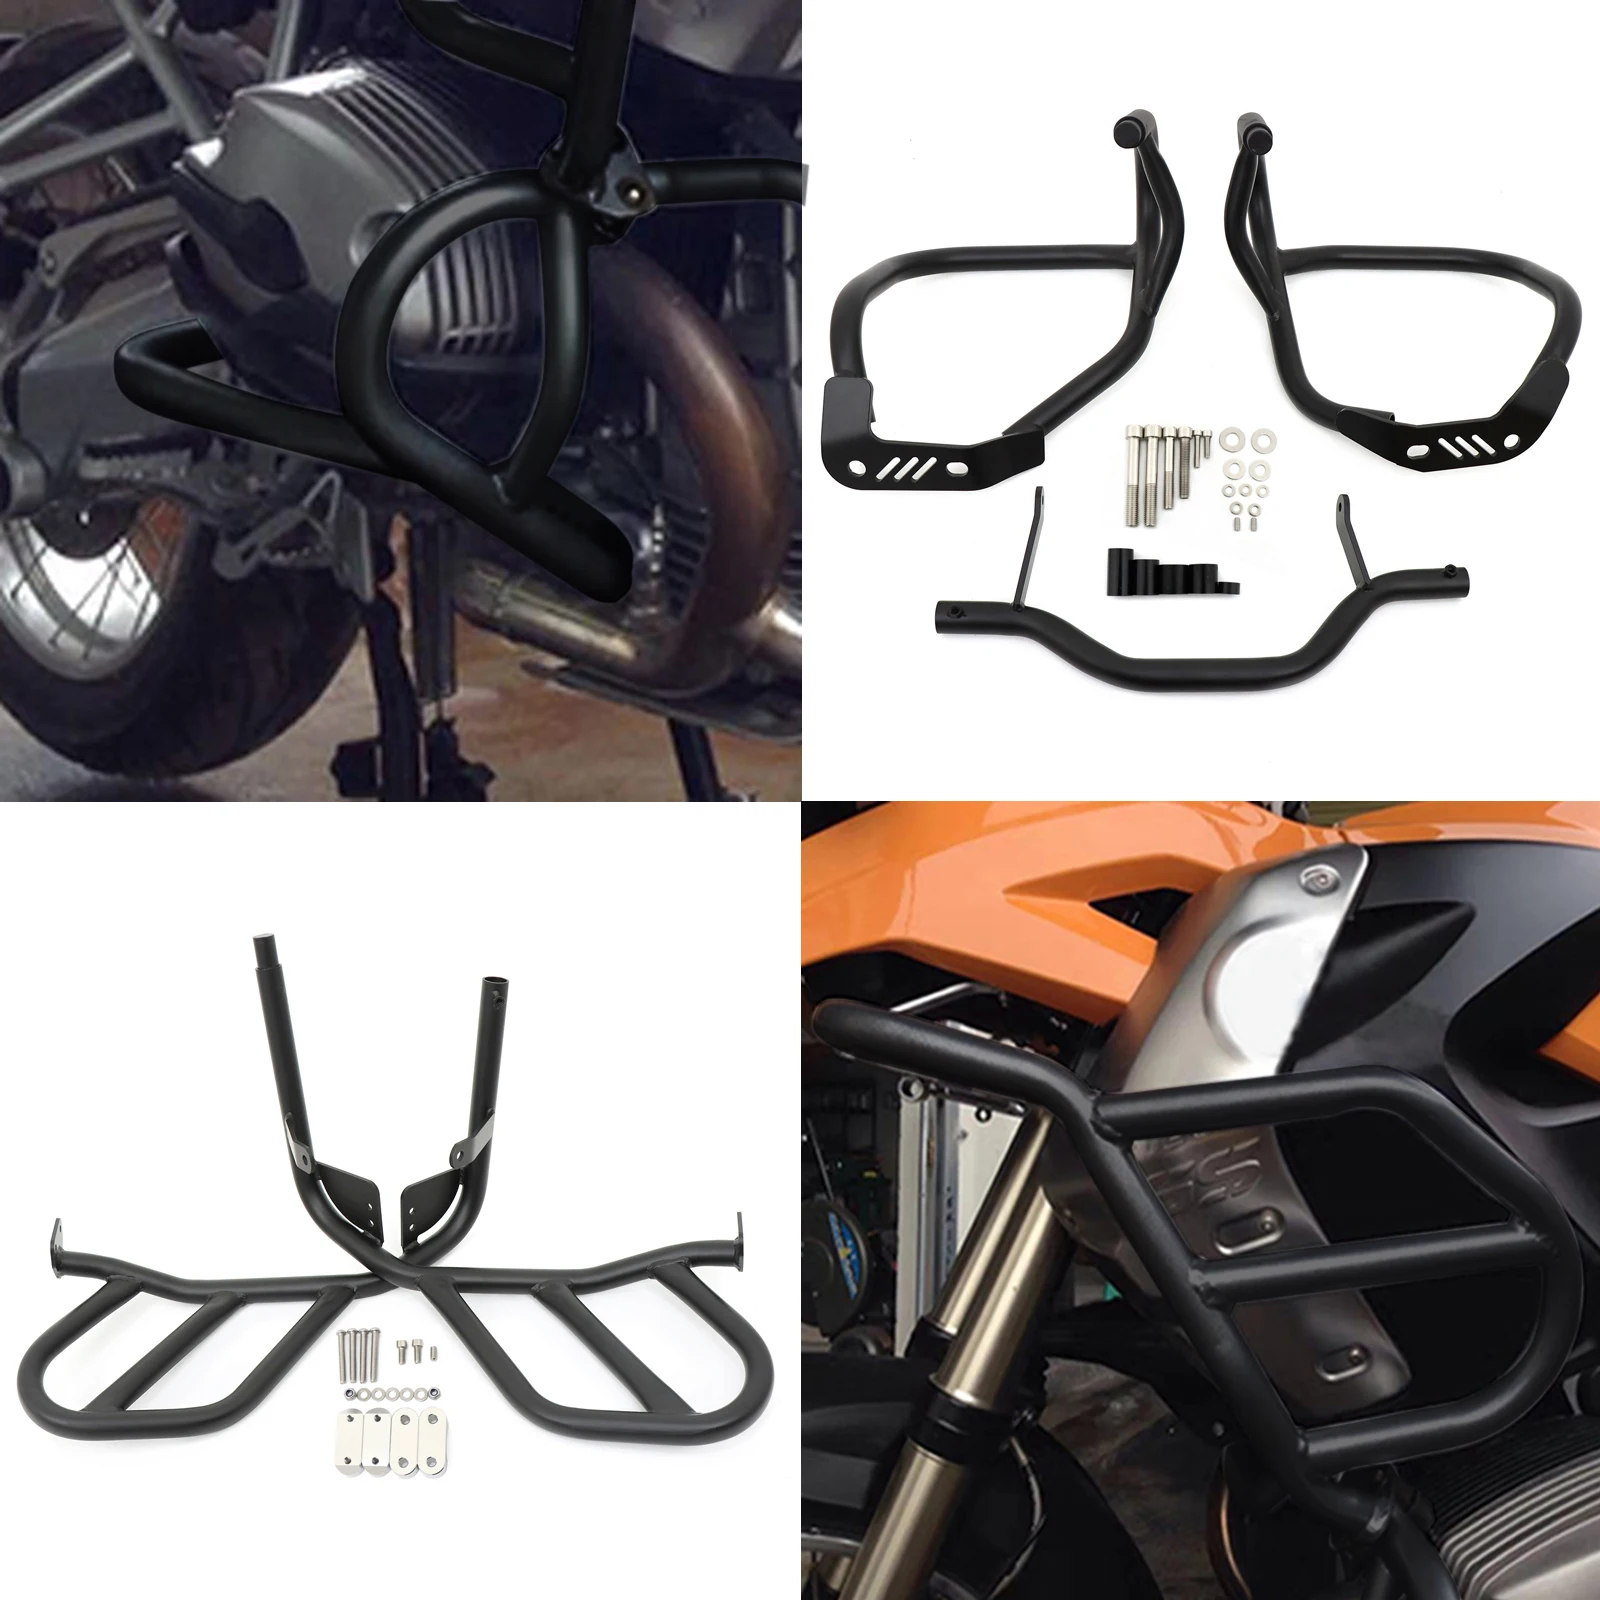 

For BMW R 1200 GS R1200GS R1200 2004 2005-2012 Oil Cooled Crash Bar Motorcycle Engine Cover Guard Bumper Stunt Cage Protector